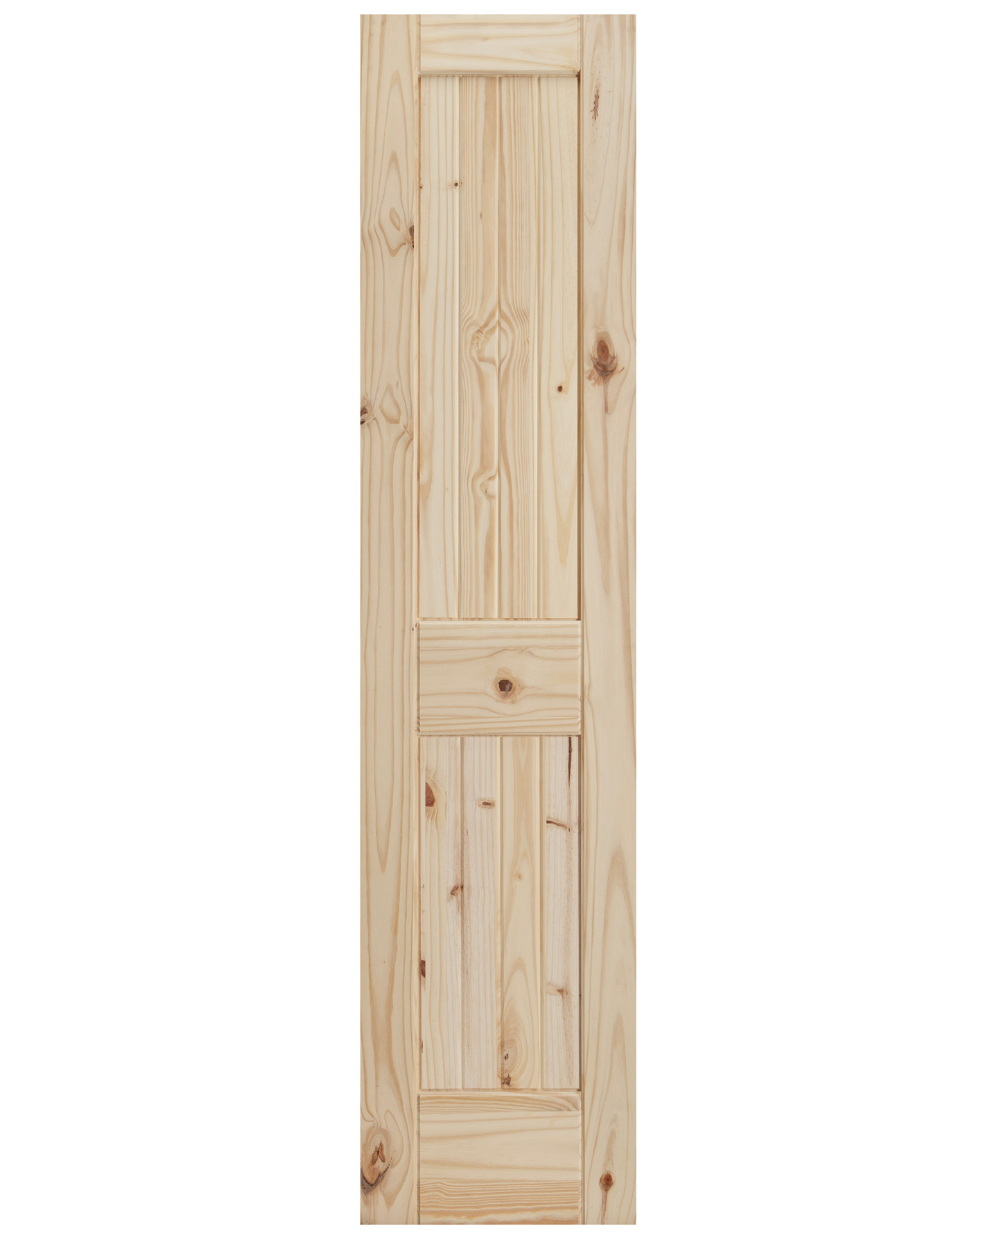 2 Panel Square Top V-Groove Knotty Pine Interior Door